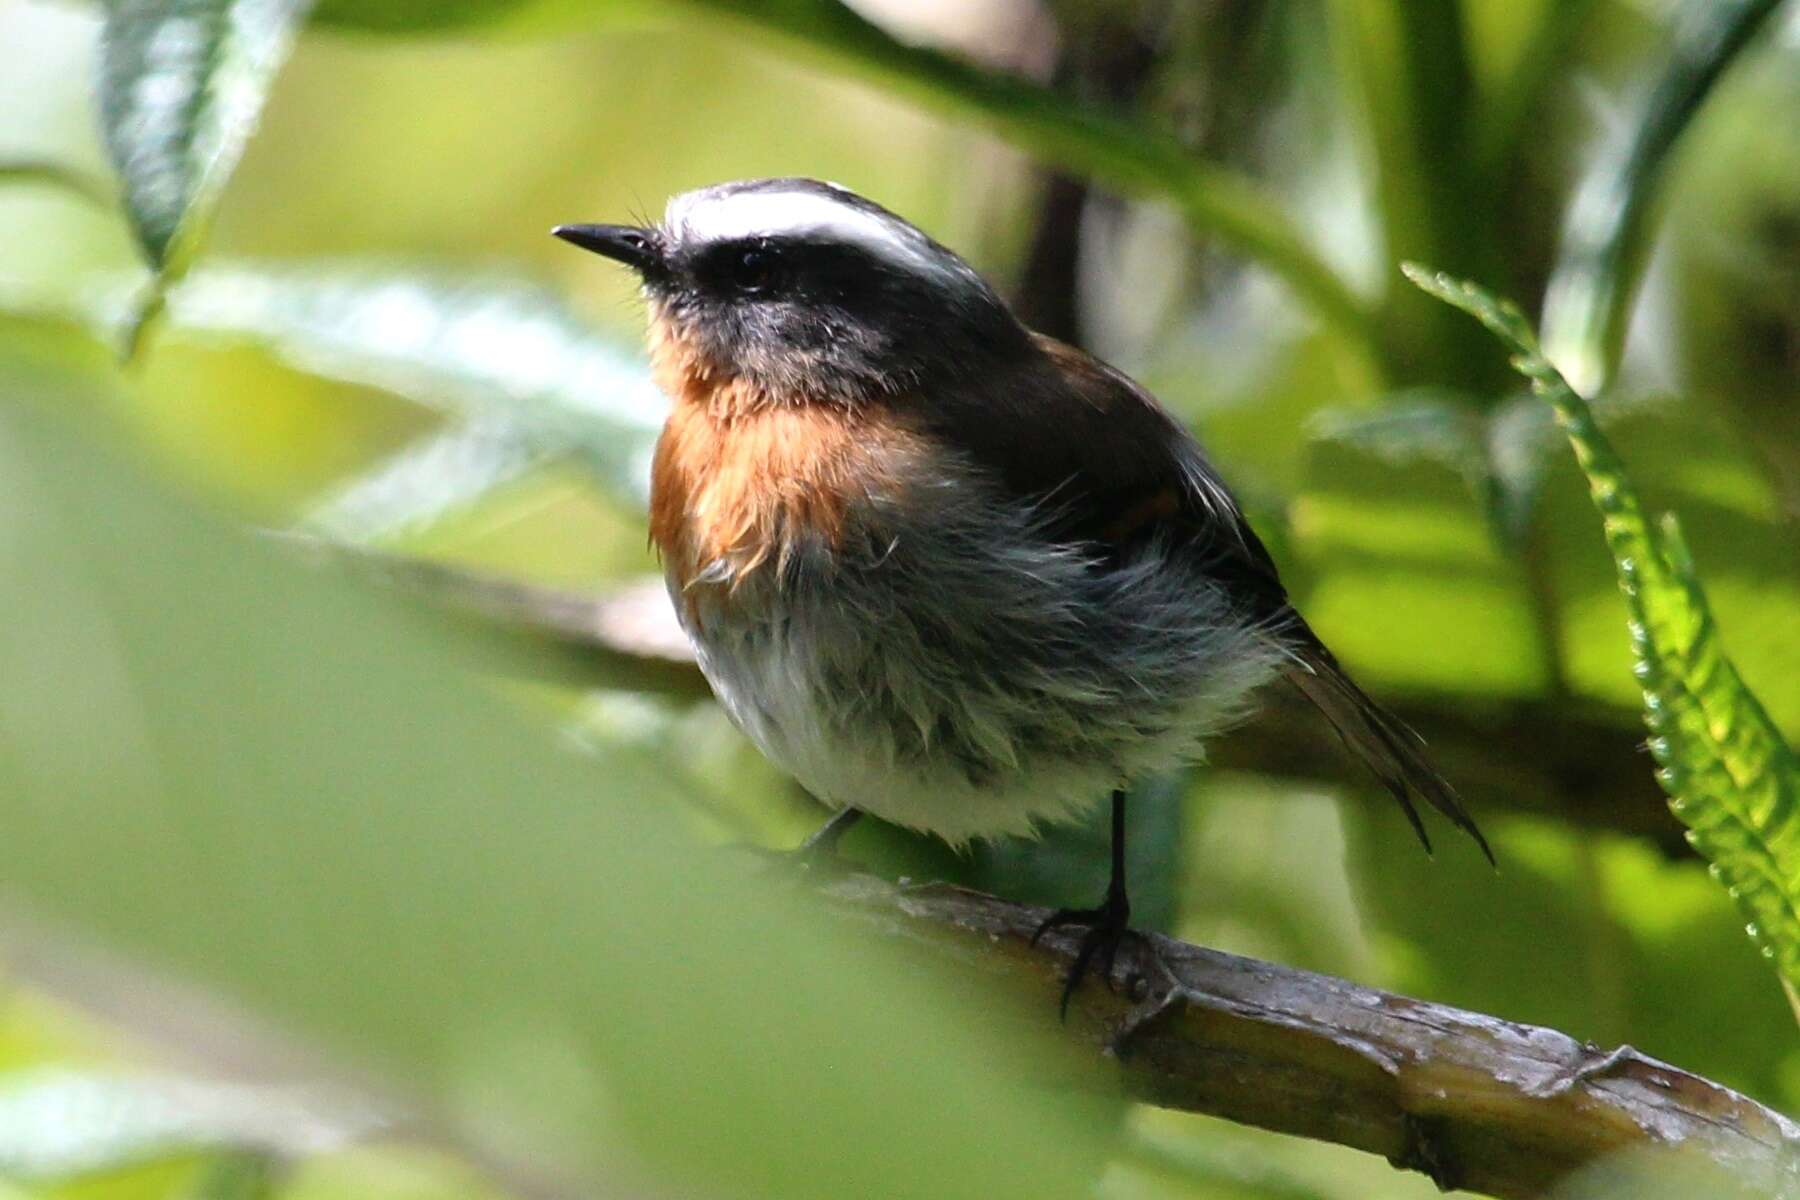 Image of Rufous-breasted Chat-Tyrant